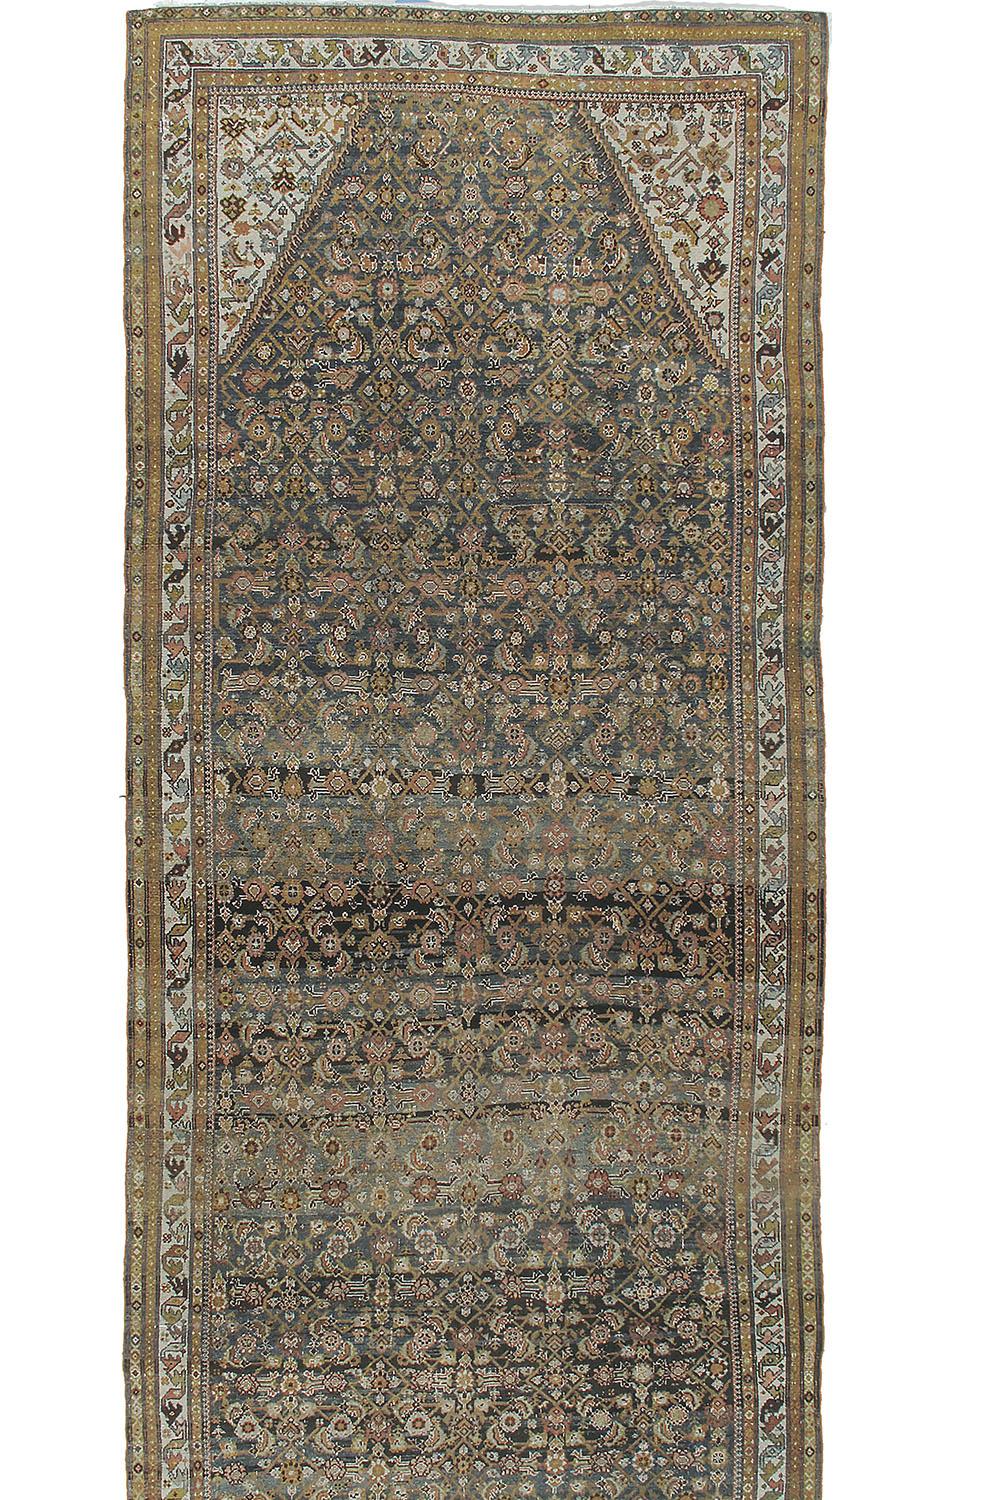 Antique Persian Malayer Rug Runner  6'2 x 24'8 For Sale 4